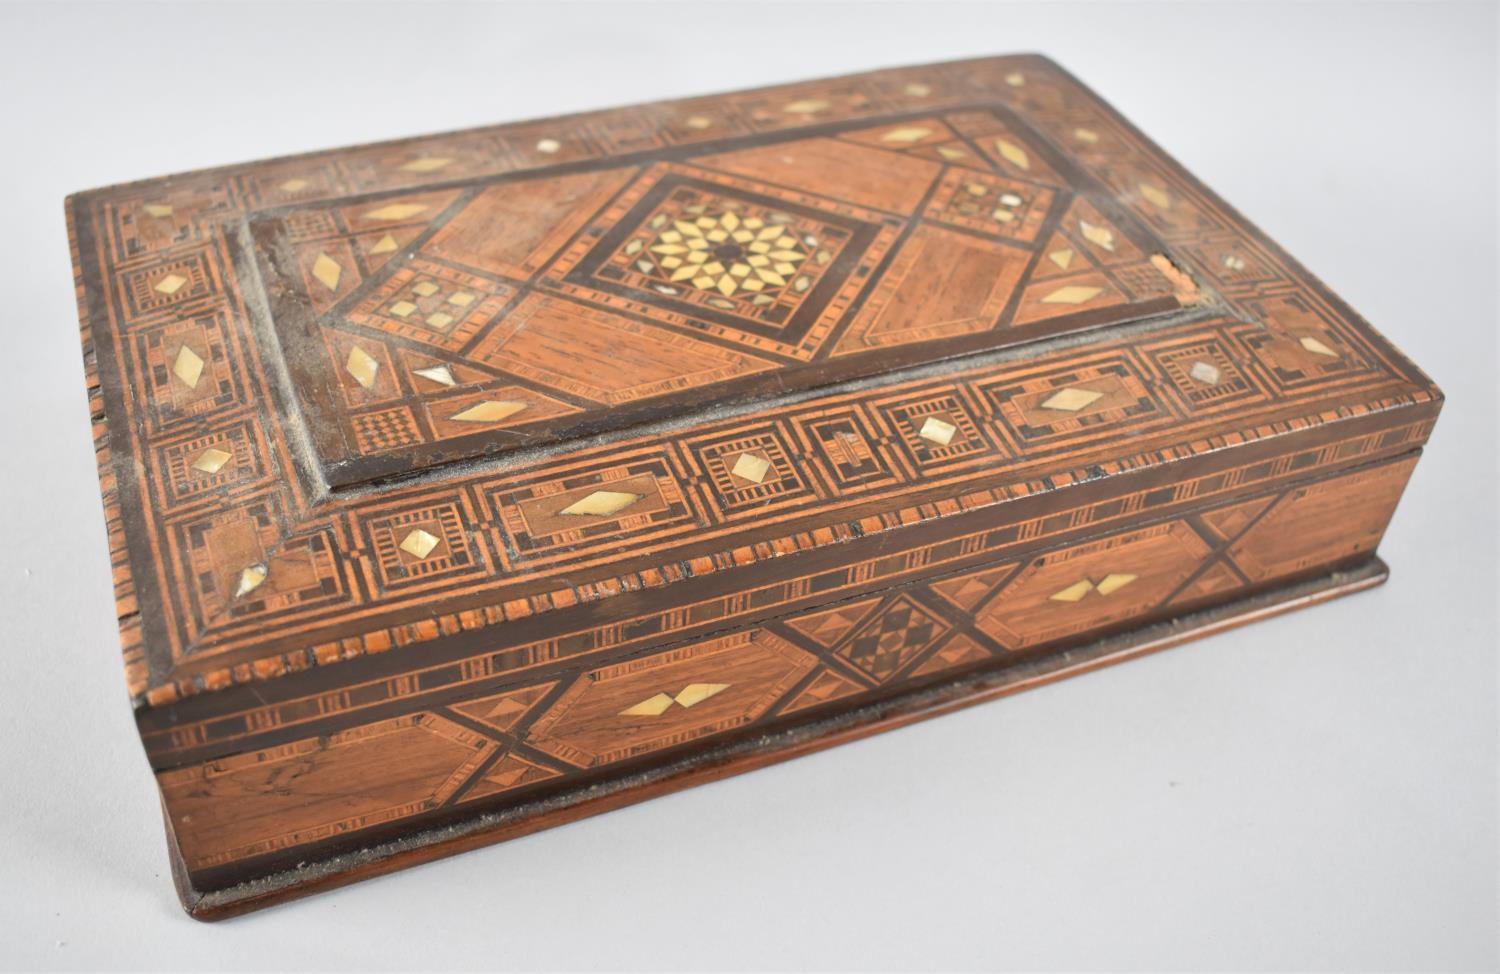 A Late 20th Century Mother of Pearl Inlaid Indian Box, 27.5cm wide